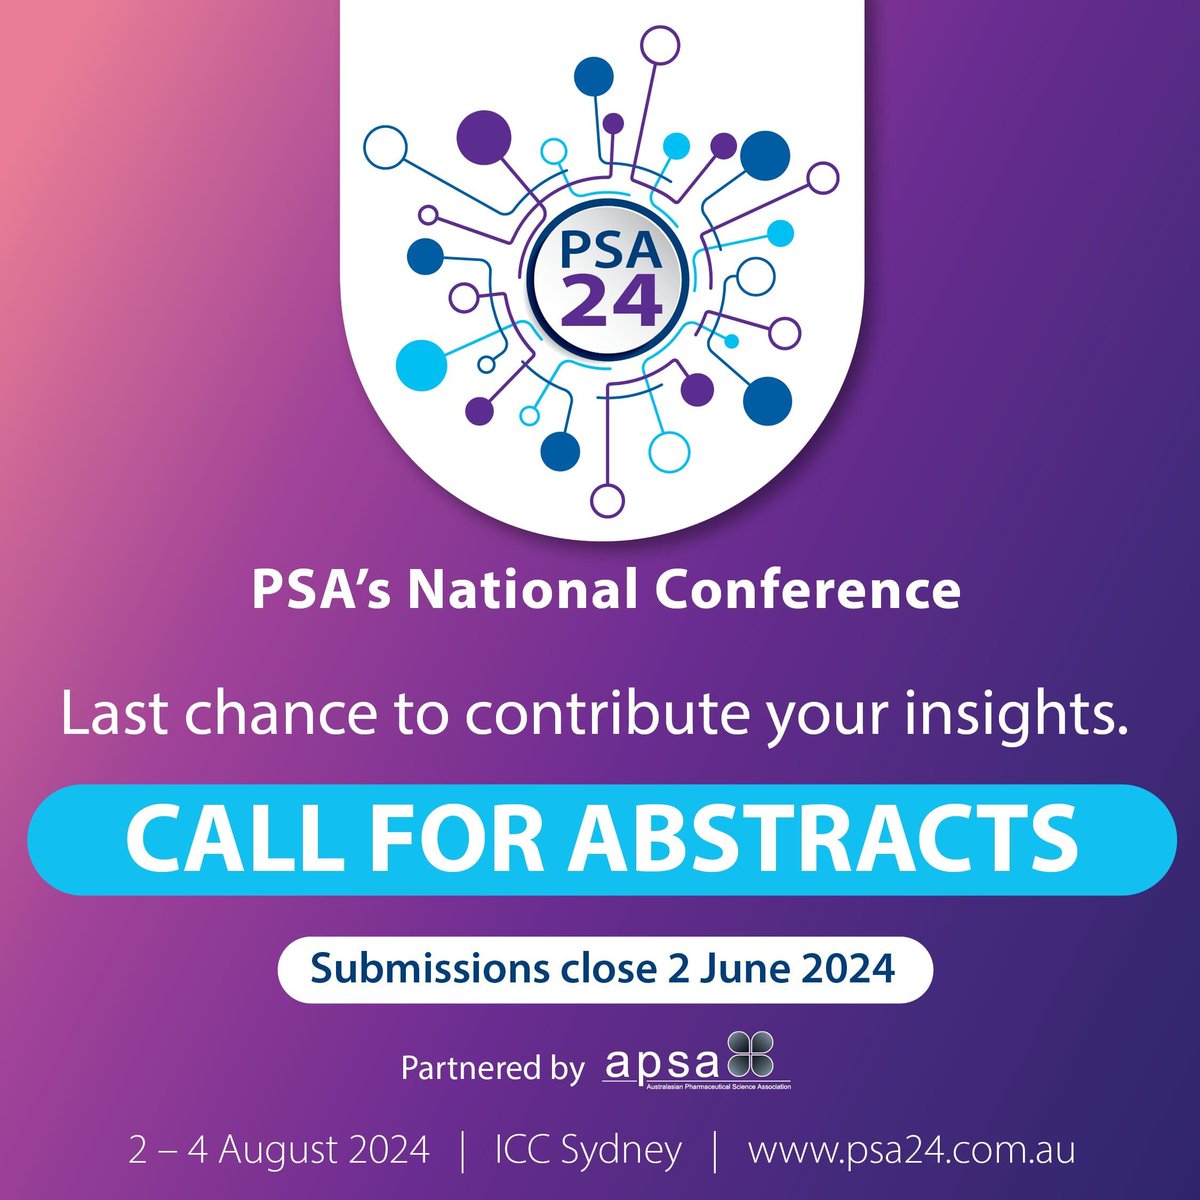 #PSA24 is your platform to influence the future of pharmacy practice. We're seeking dynamic contributions in research papers and case studies. This is your chance to engage with peers, gain expert feedback, and highlight your research. Submit today: buff.ly/3Q4A9H3